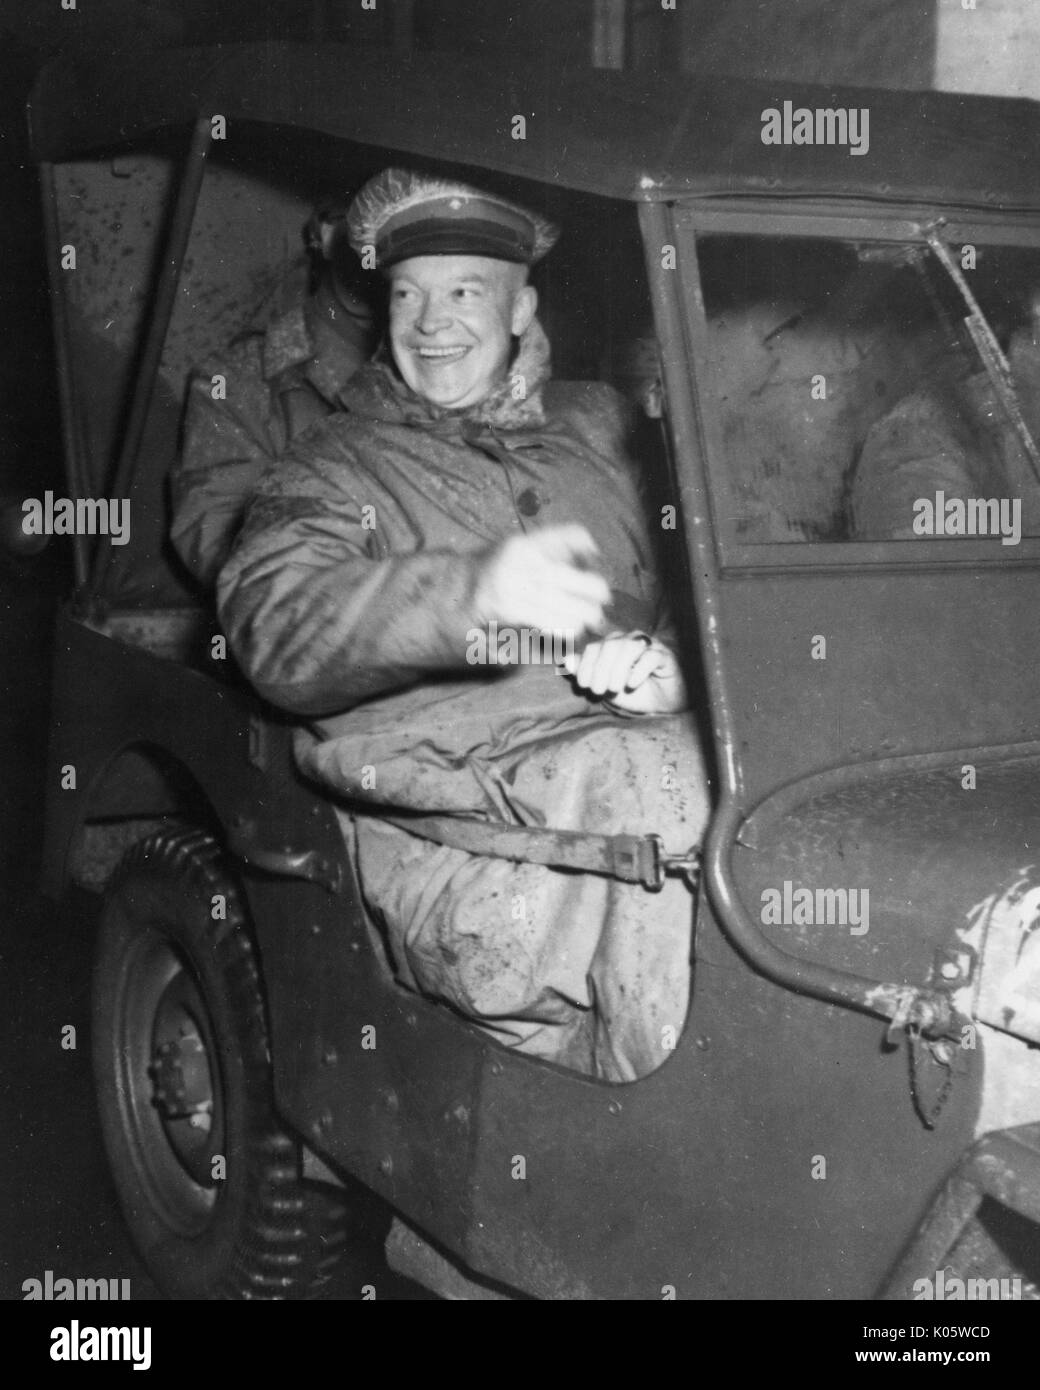 Full-body portrait of Milton S Eisenhower, former President of the Johns Hopkins University, seated in a military Jeep, wearing a large coat and a hat, with a smiling facial expression, gesturing his hands out of the car, 1970. Stock Photo